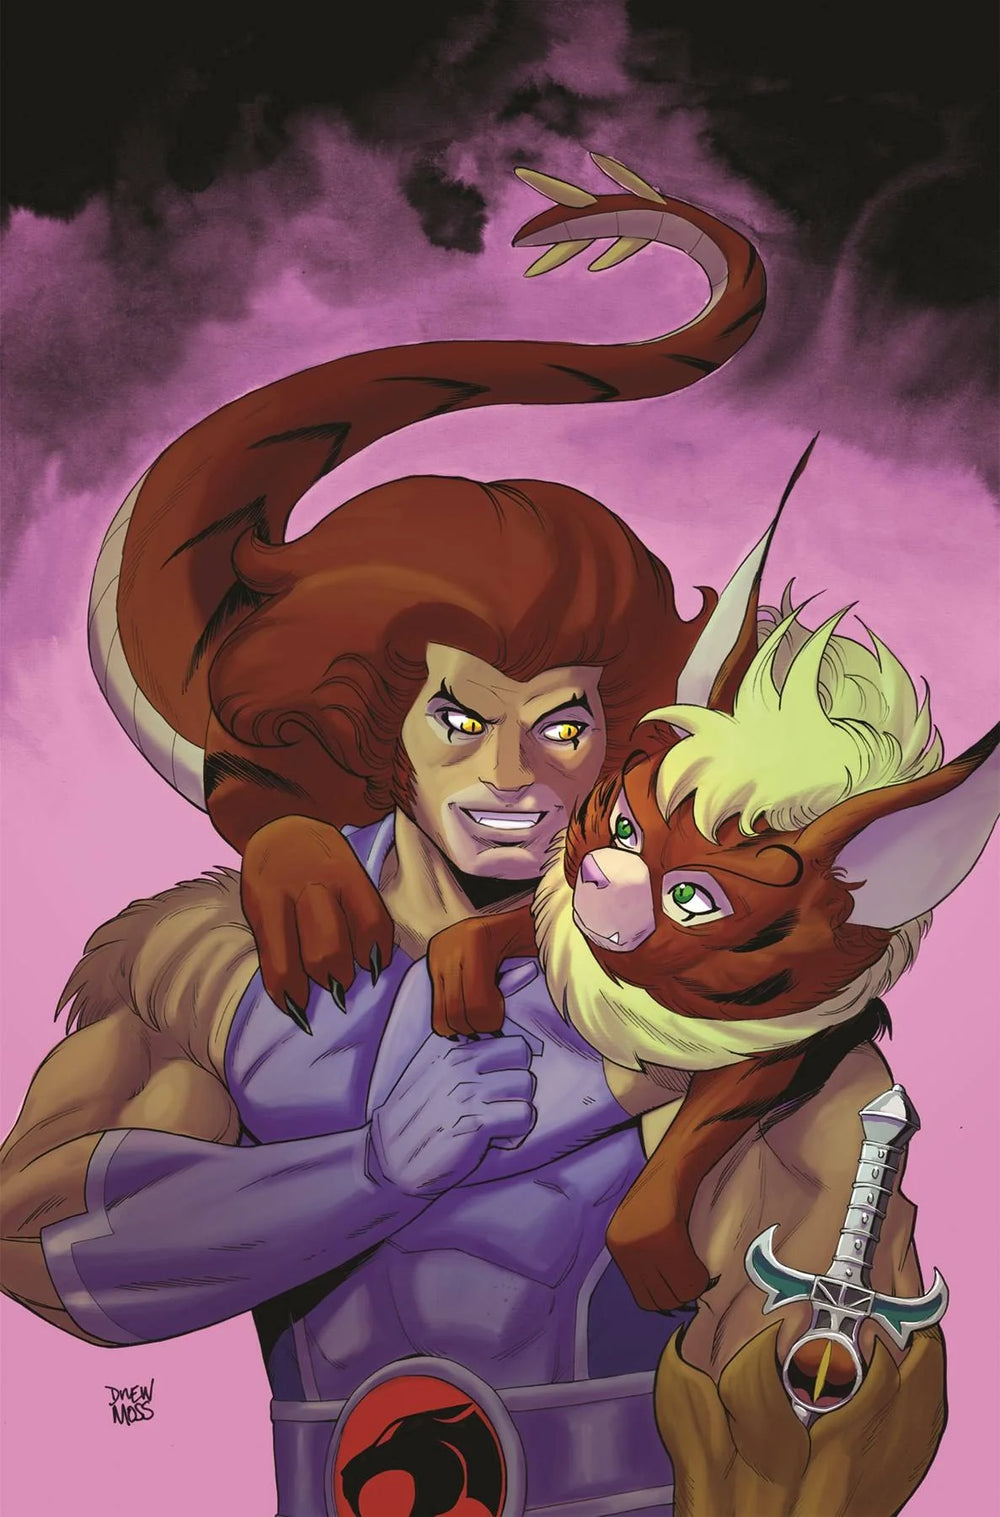 THUNDERCATS #3 INCENTIVE COVER 1:15 BY DREW MOSS VIRGIN